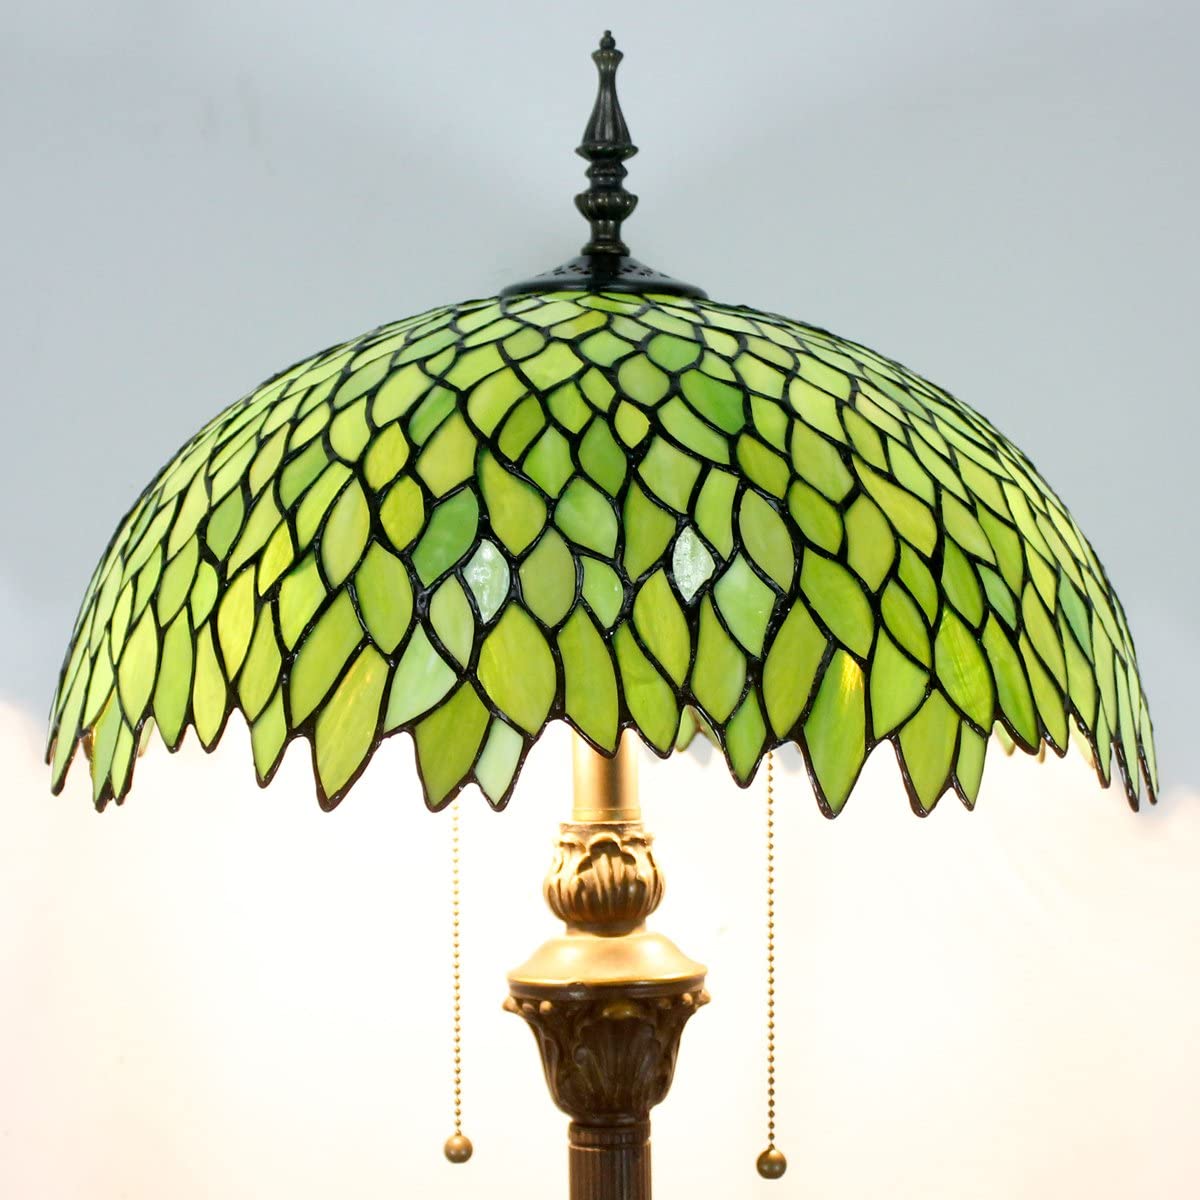  Floor Lamp Green Wisteria Stained Glass Standing Reading Light 16X16X64 Inches Antique Style Pole Corner Lamp Decor Bedroom Living Room Home Office S523 Series